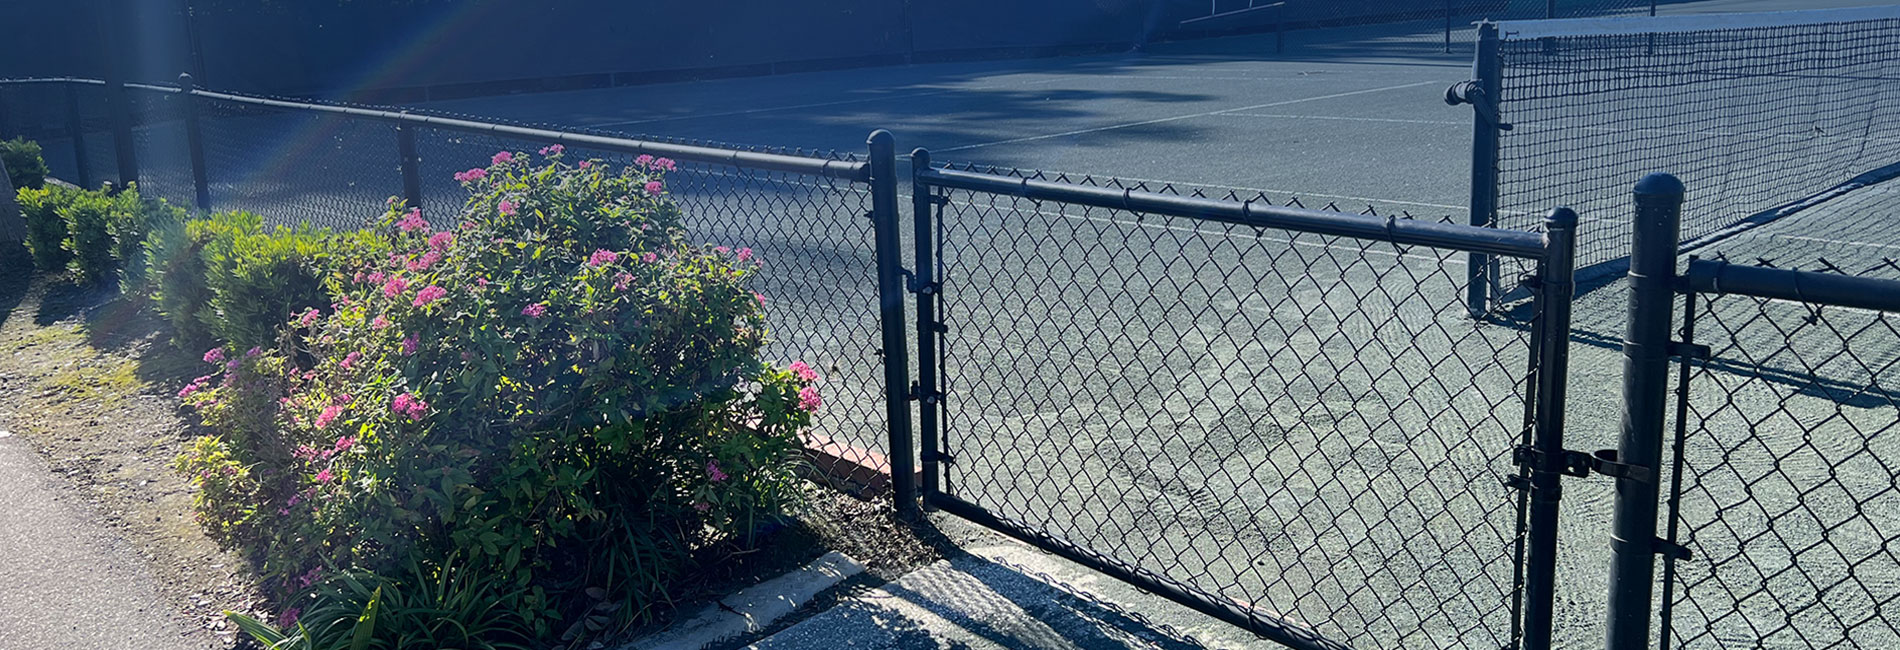 Black color coated tube with chain link fence in use on a tennis court